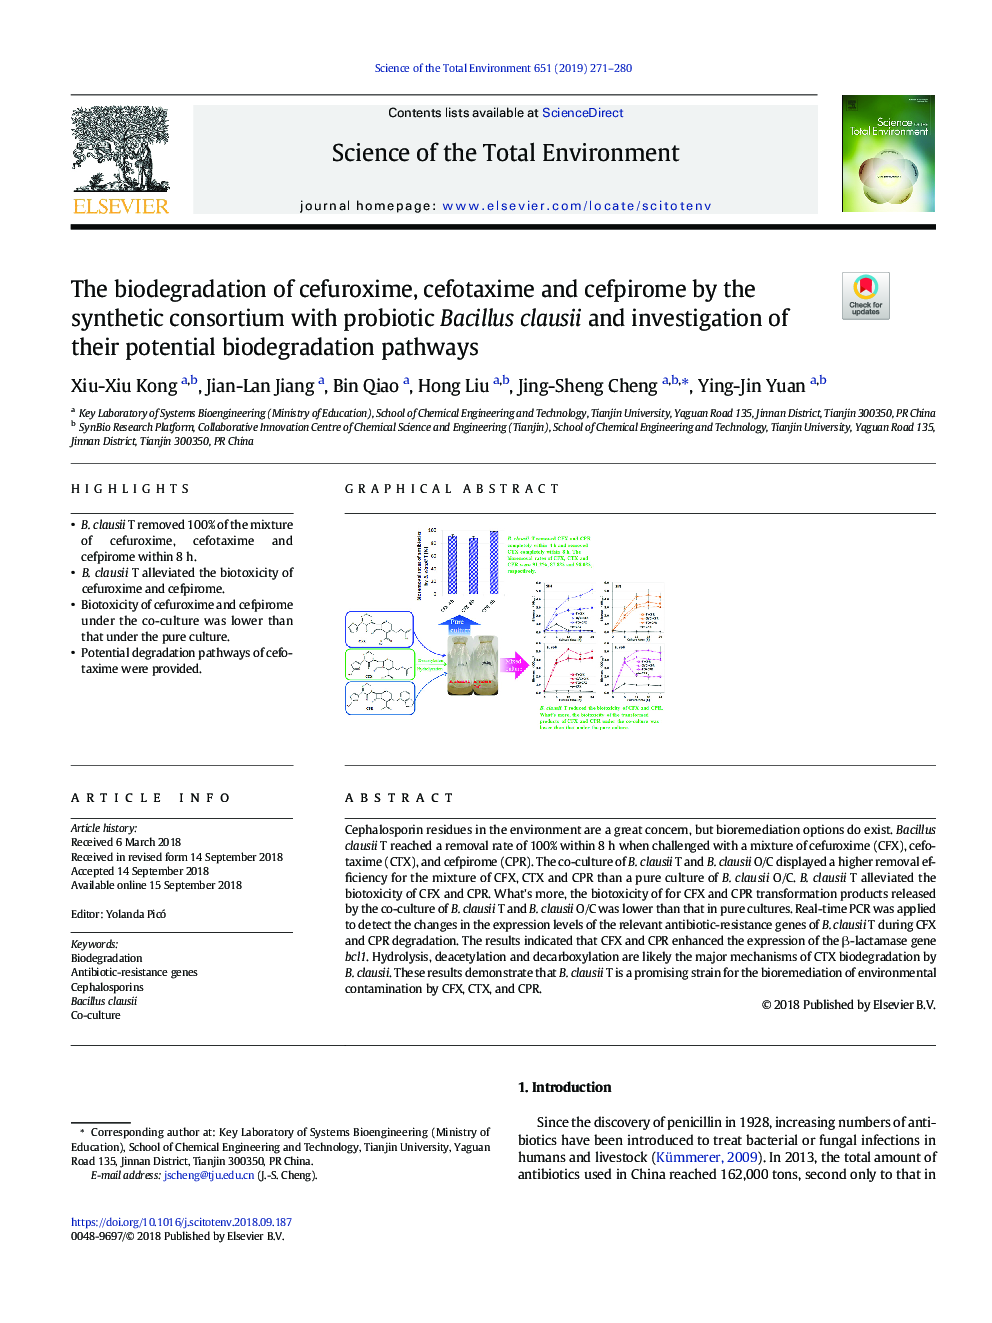 The biodegradation of cefuroxime, cefotaxime and cefpirome by the synthetic consortium with probiotic Bacillus clausii and investigation of their potential biodegradation pathways